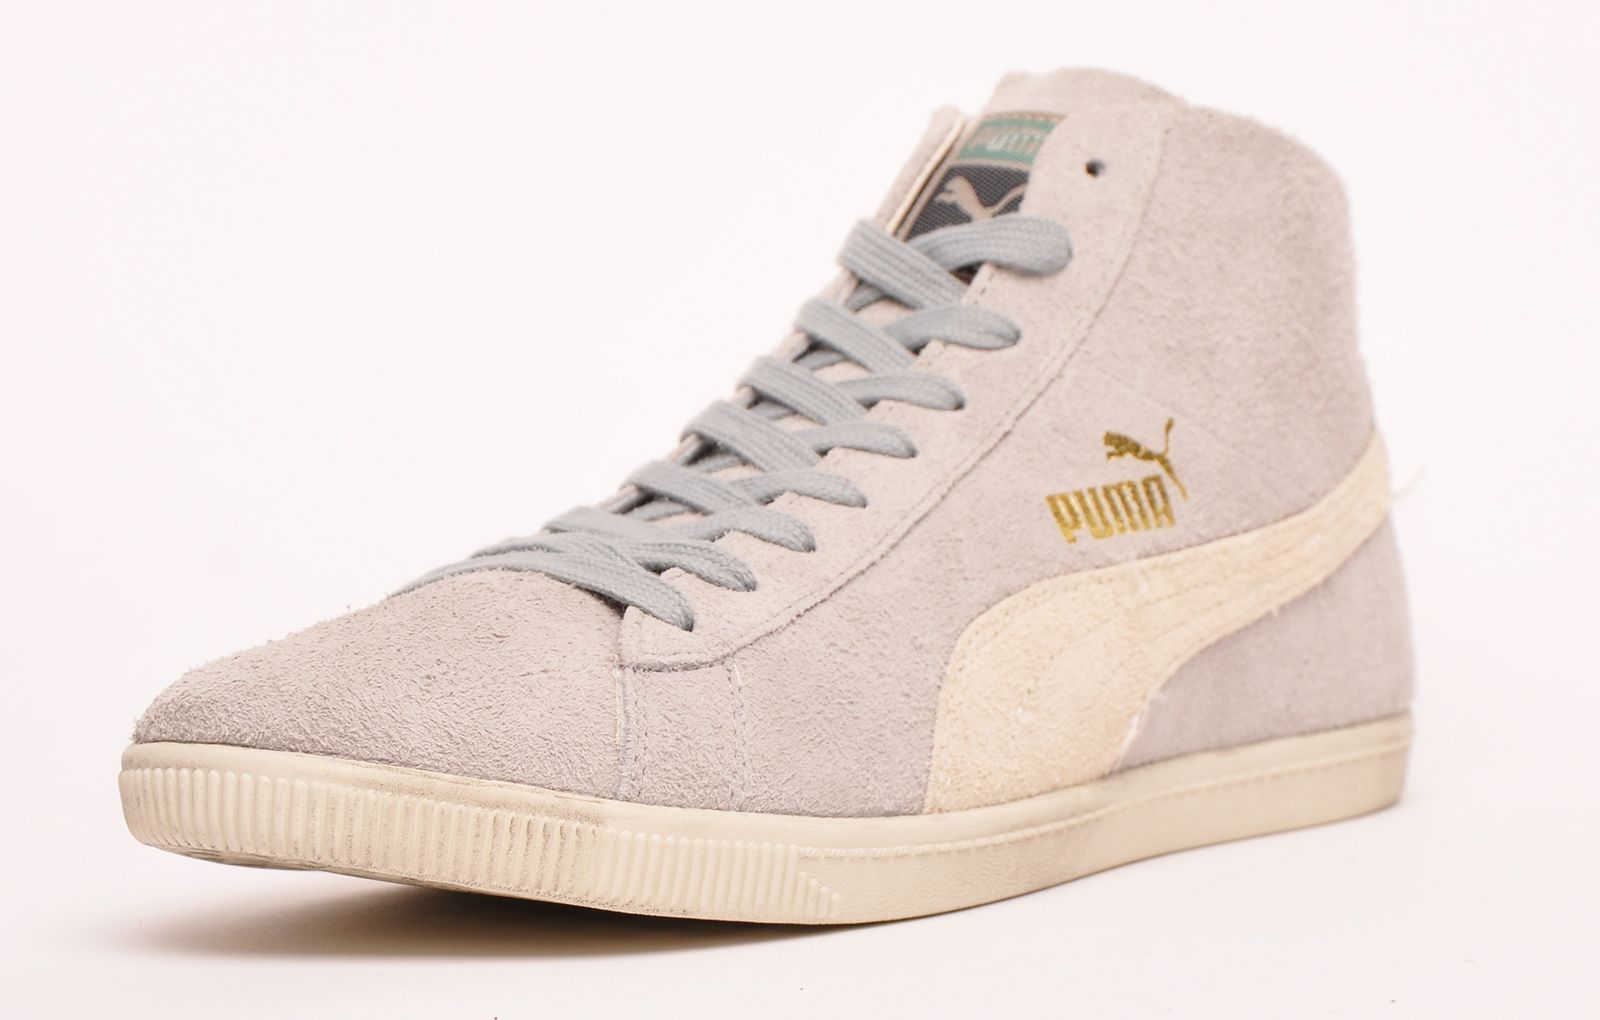 Puma Gylde Mid VTG Grey Trainers. Puma Gylde Mid VTG Grey Trainers. Style: 354392-04. Classic Puma Suede High Top Sneaker. Lace Fasten Trainers, Worn Frayed Thread Detail. Branding On Tongue, Back and Side